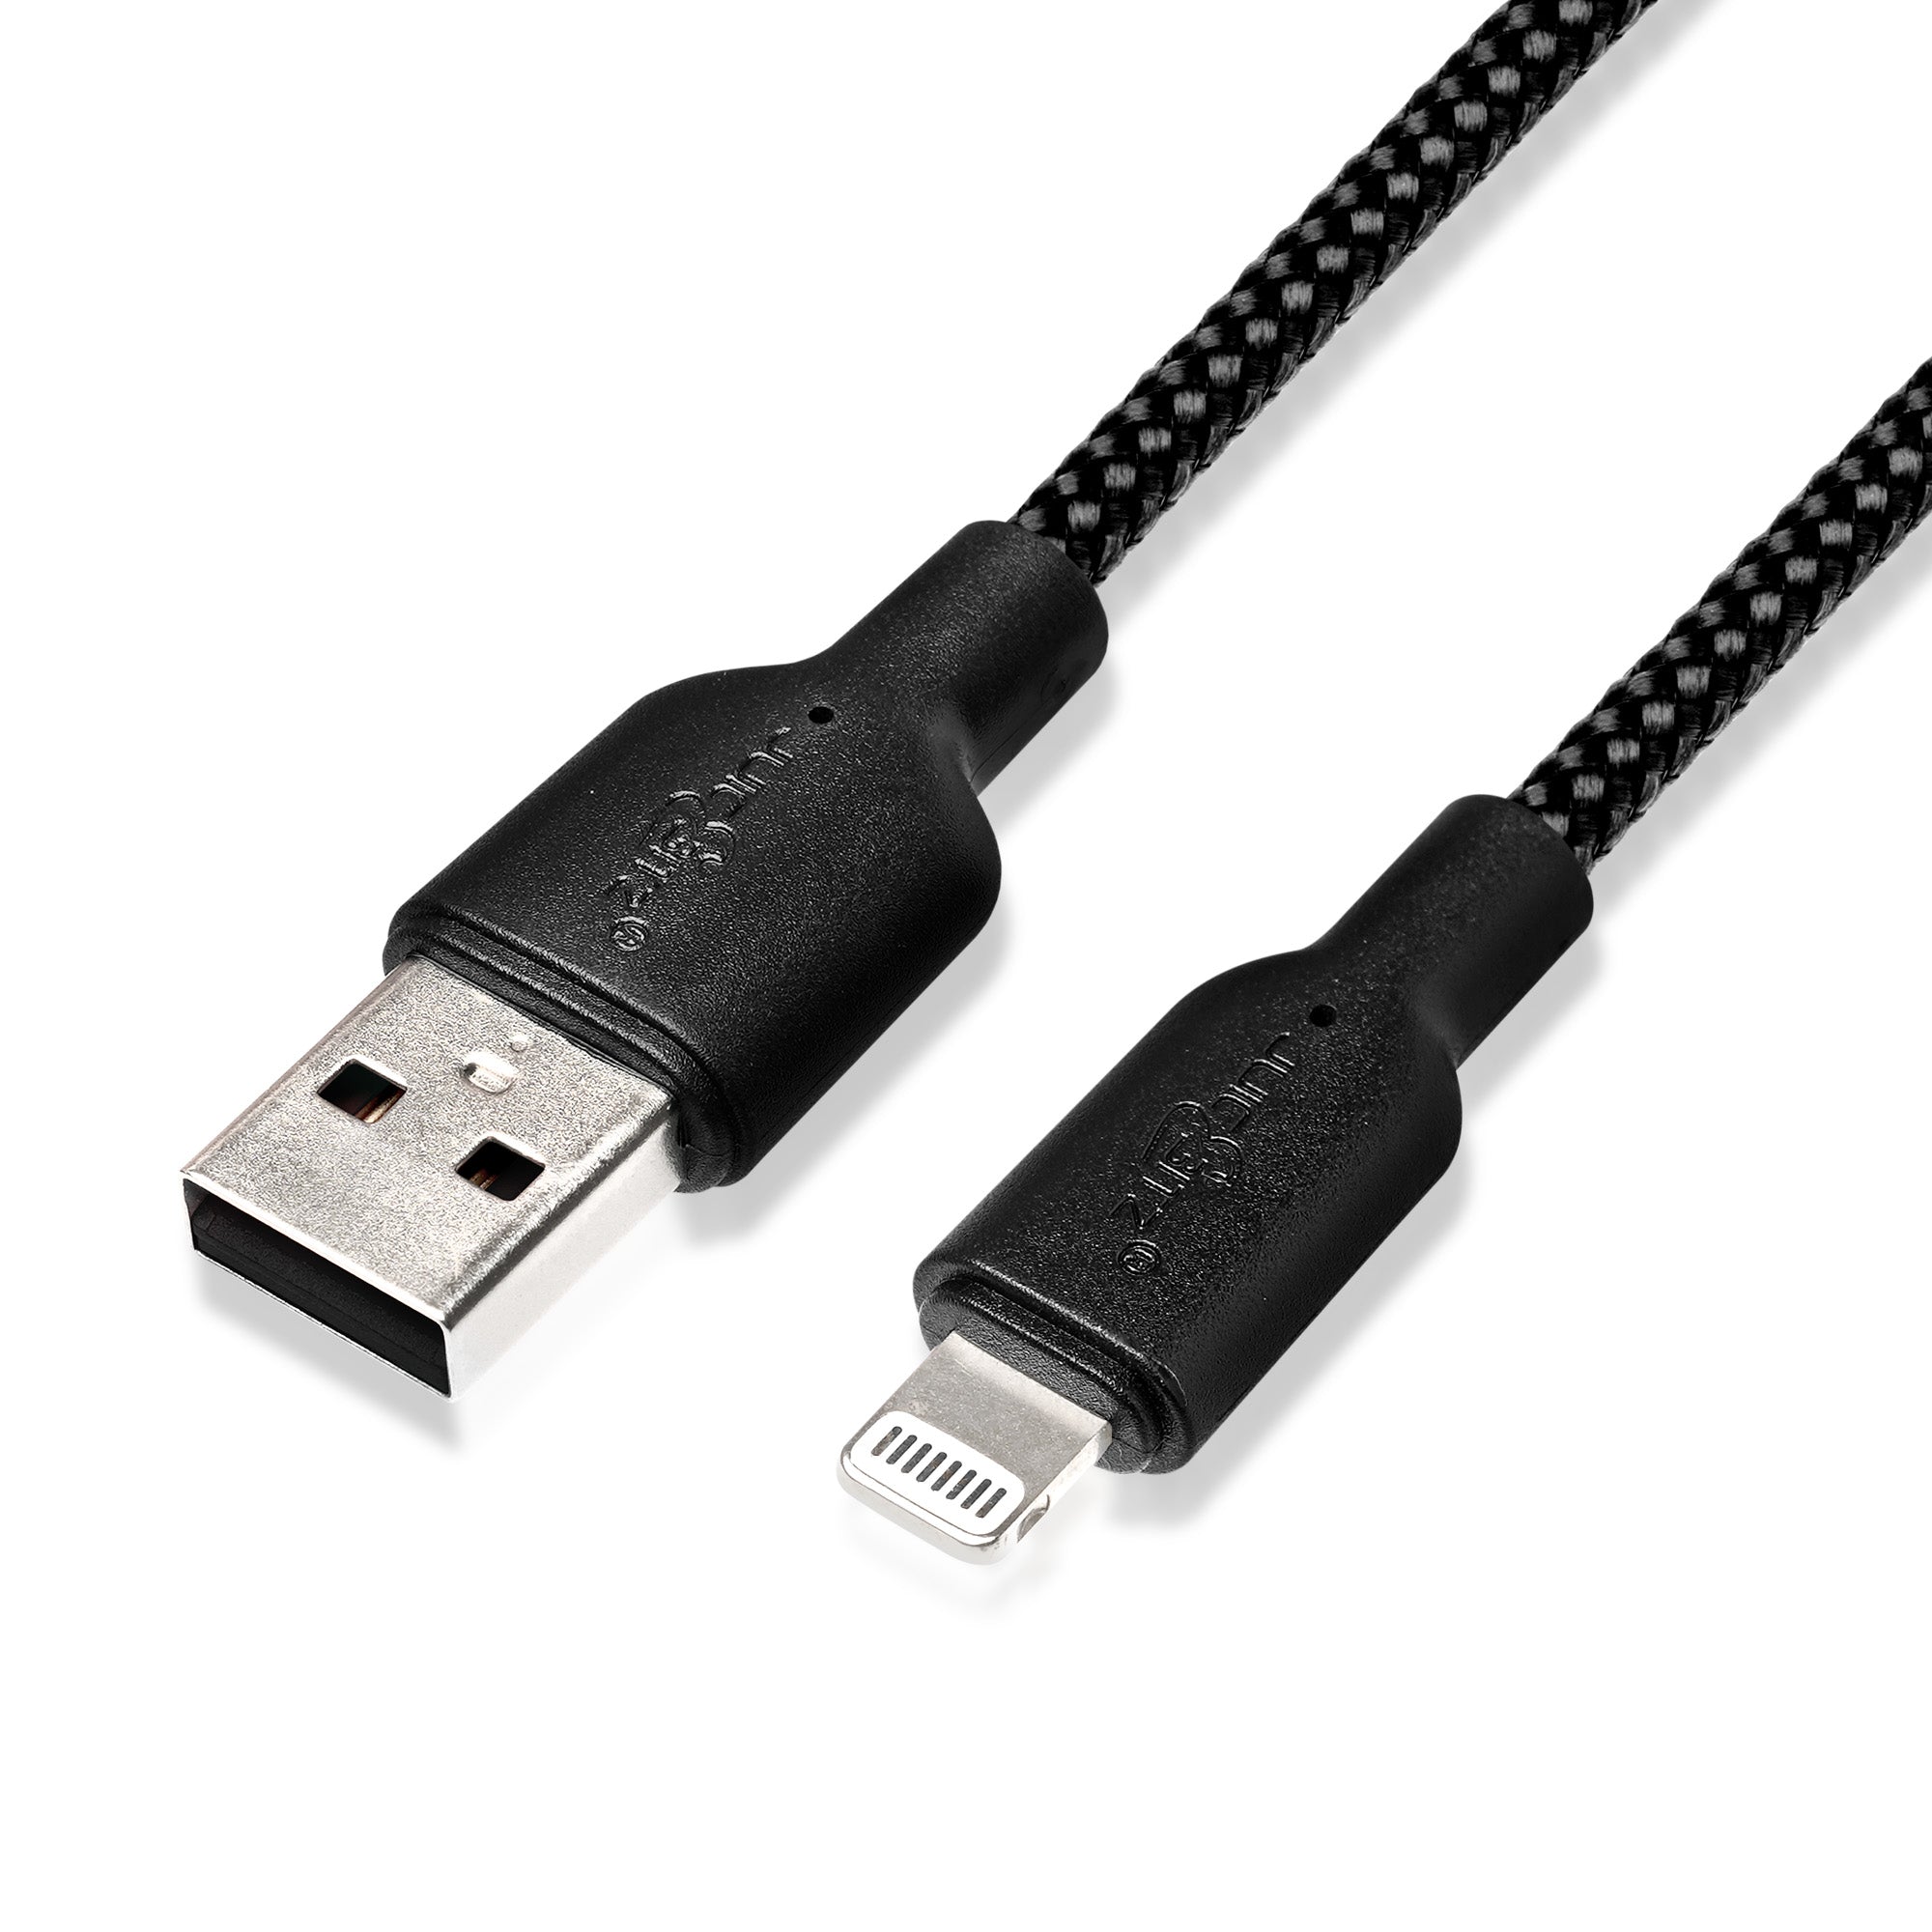 Braided Heavy Duty USB Charger Cable Data Sync Wire Lead for iPhone, iPad, iPod - Black